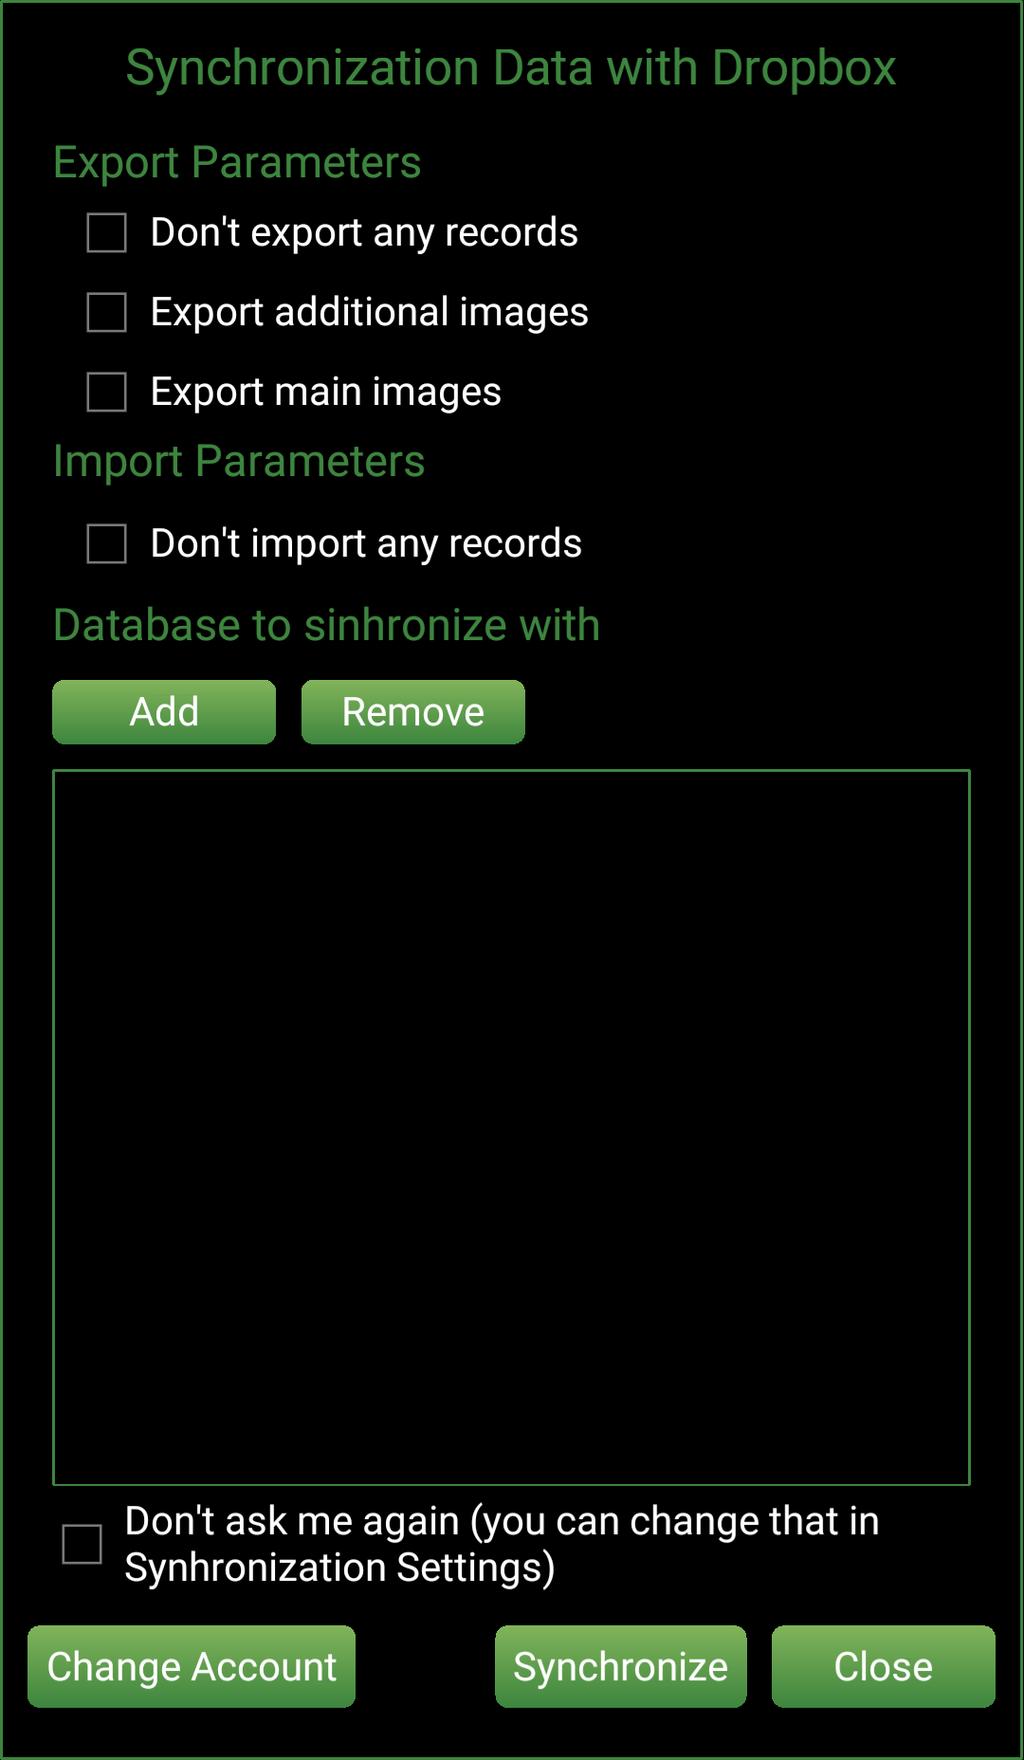 Here you have Export and Import Parameters and a list of Databases to synchronize with.